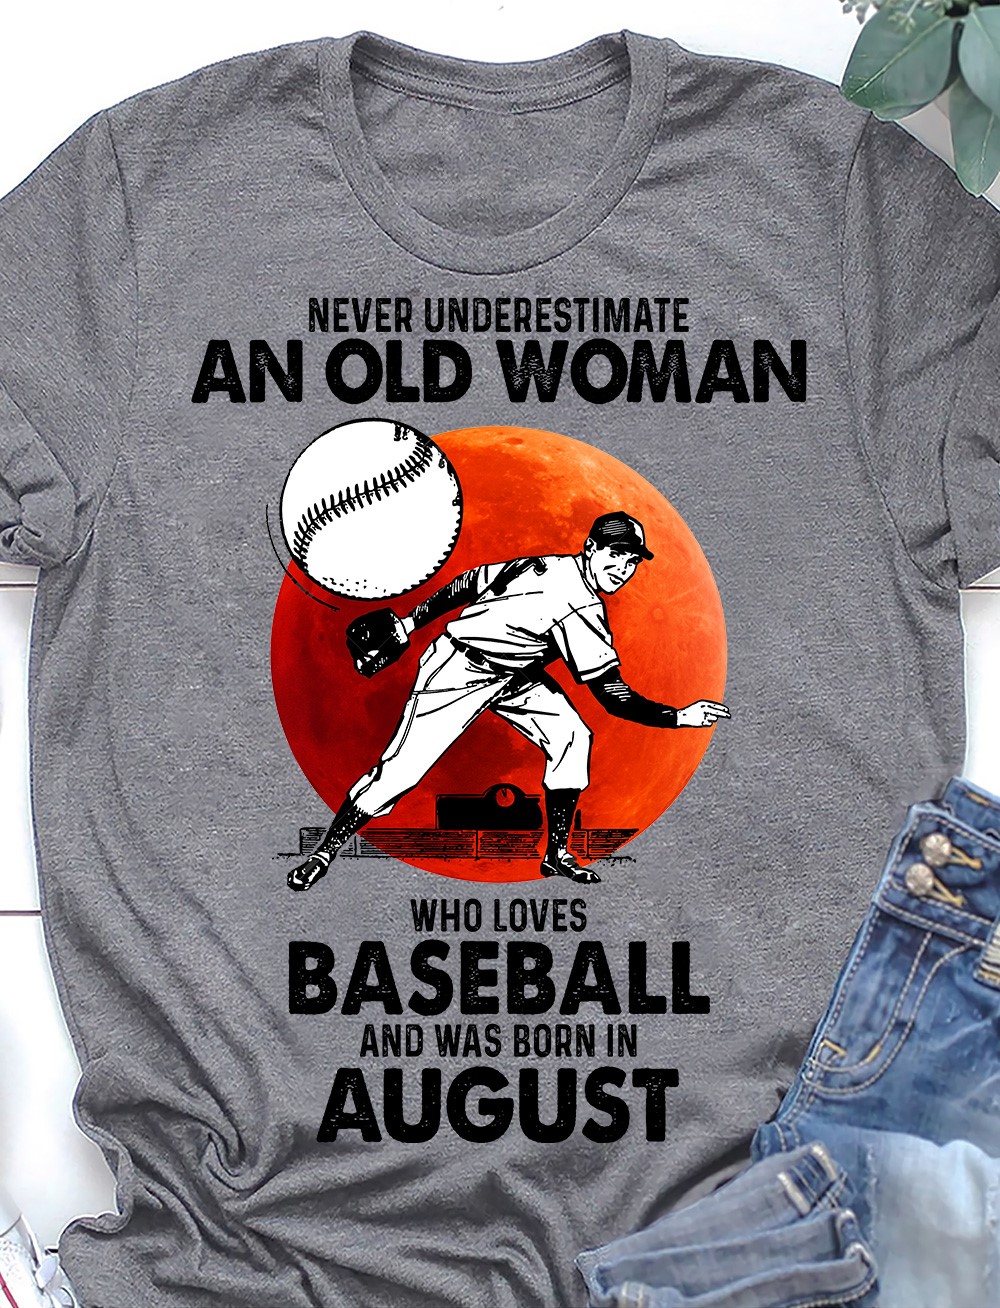 Never underestimate an old woman who loves baseball and was born in August